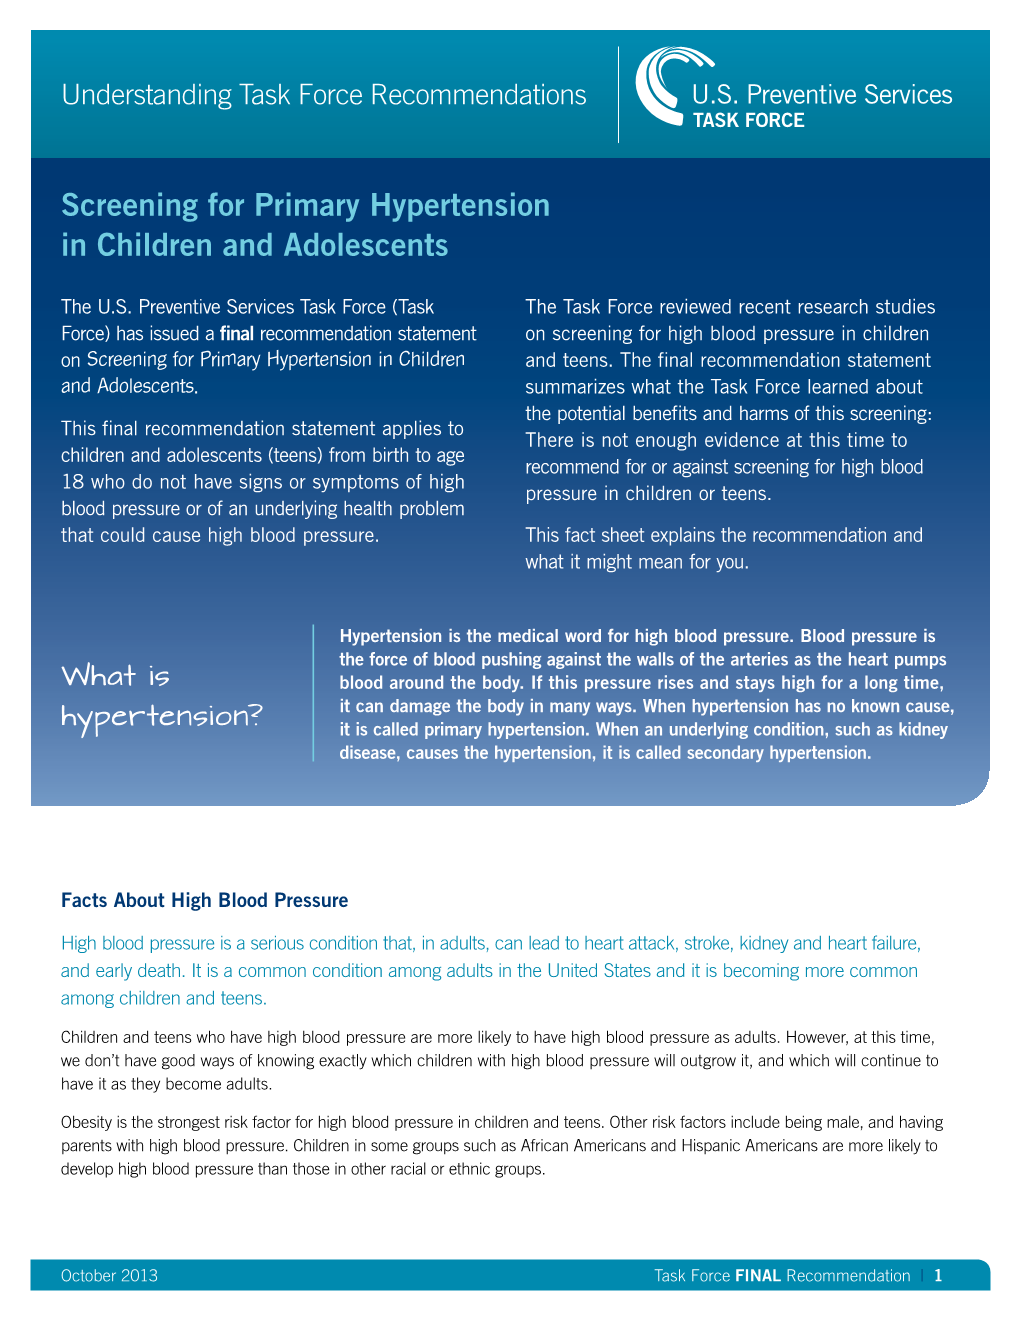 Screening for Hypertension in Children and Adolescents